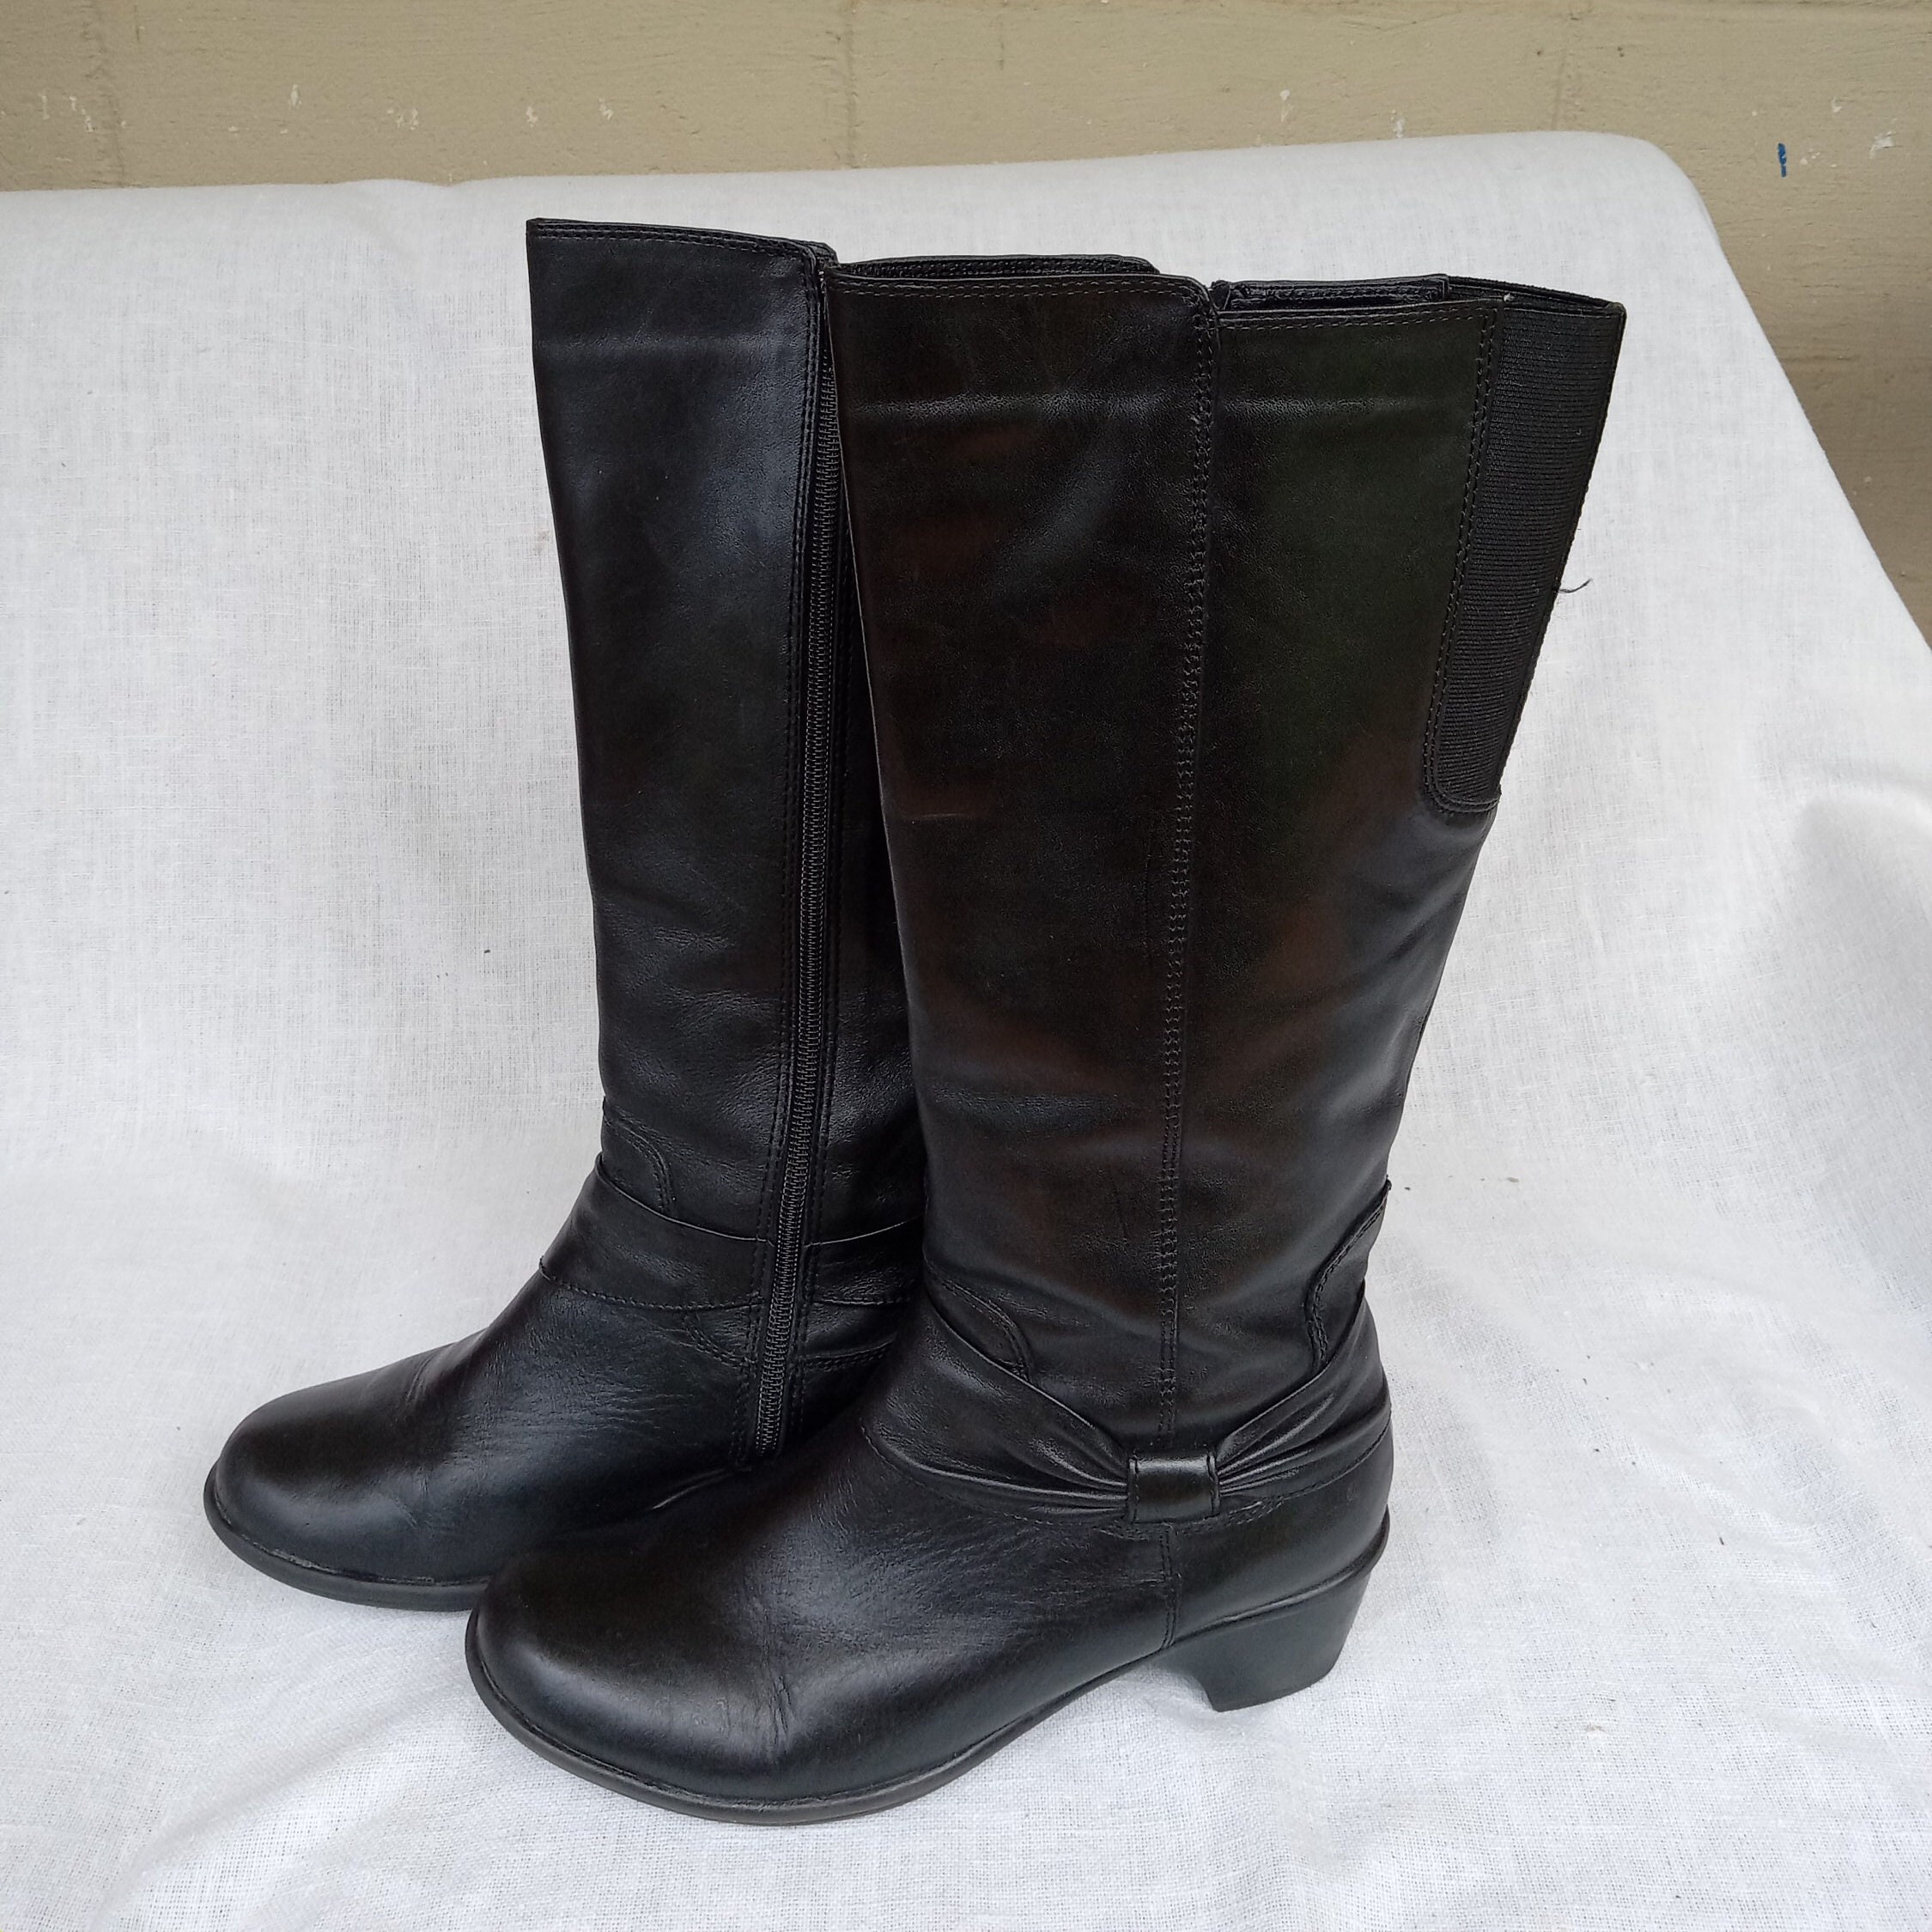 Dingo 70'S Beige Leather Mid Calf or Knee High Boots with Gold ...